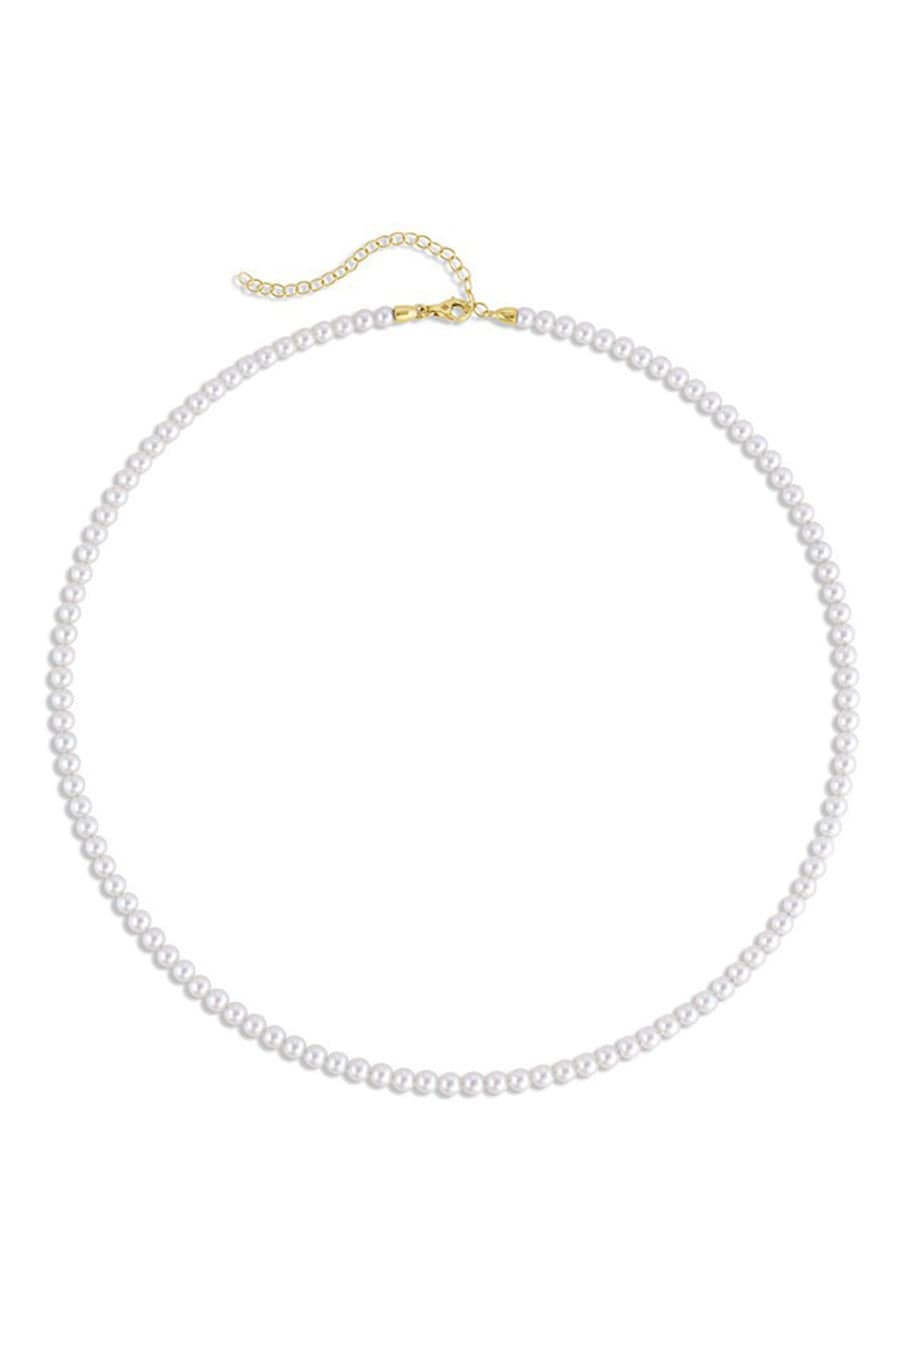 BAGGINS-Baby Akoya Round Pearl Necklace-YELLOW GOLD